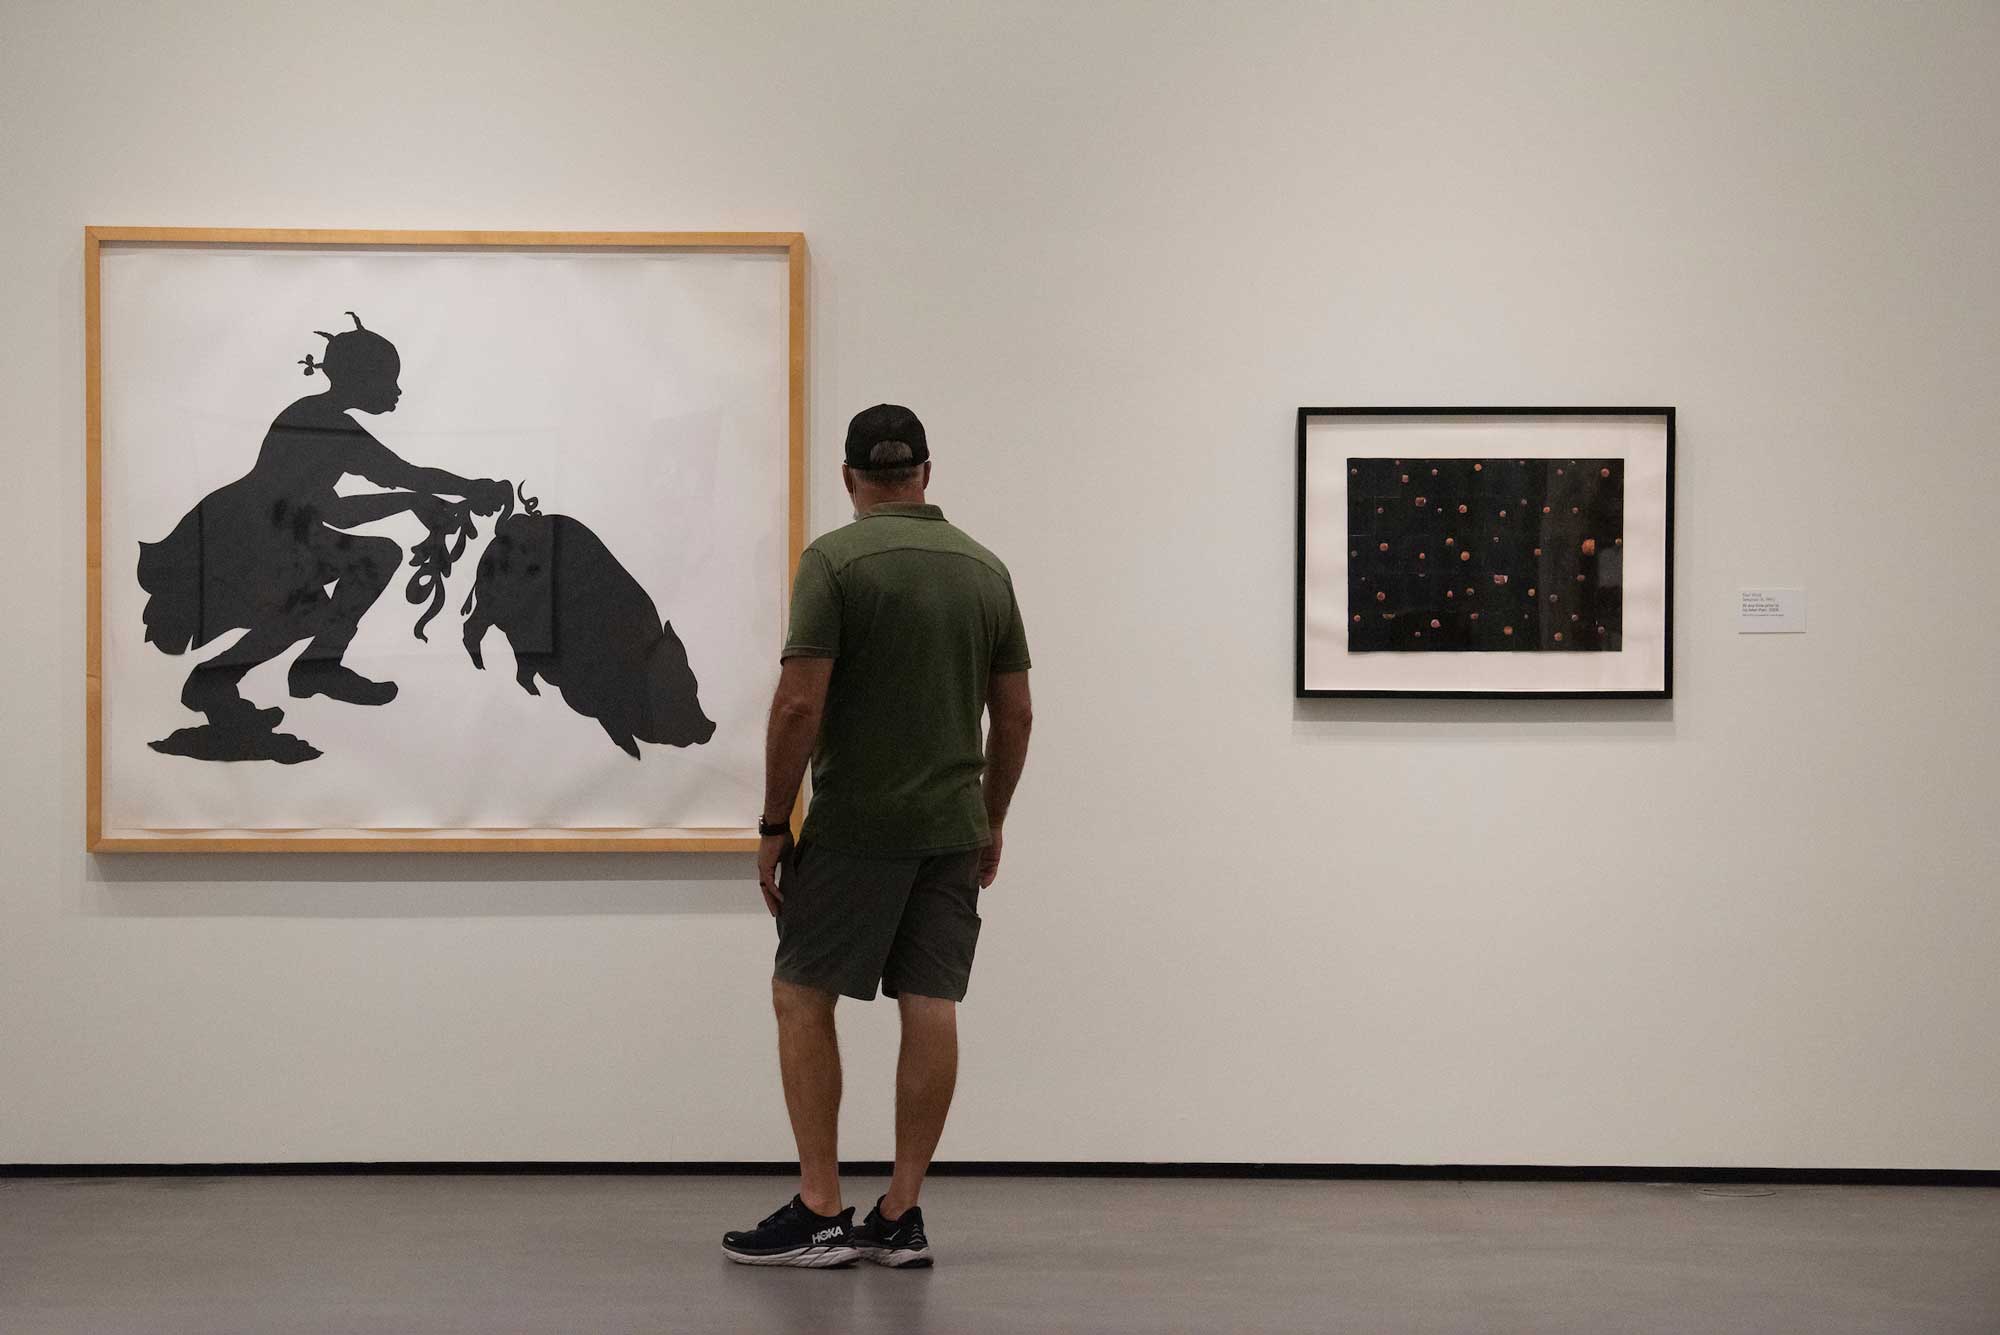 A man stands in front of Kara Walker's artwork of a black silhouette of a young girl playing with the entrails of a pig.